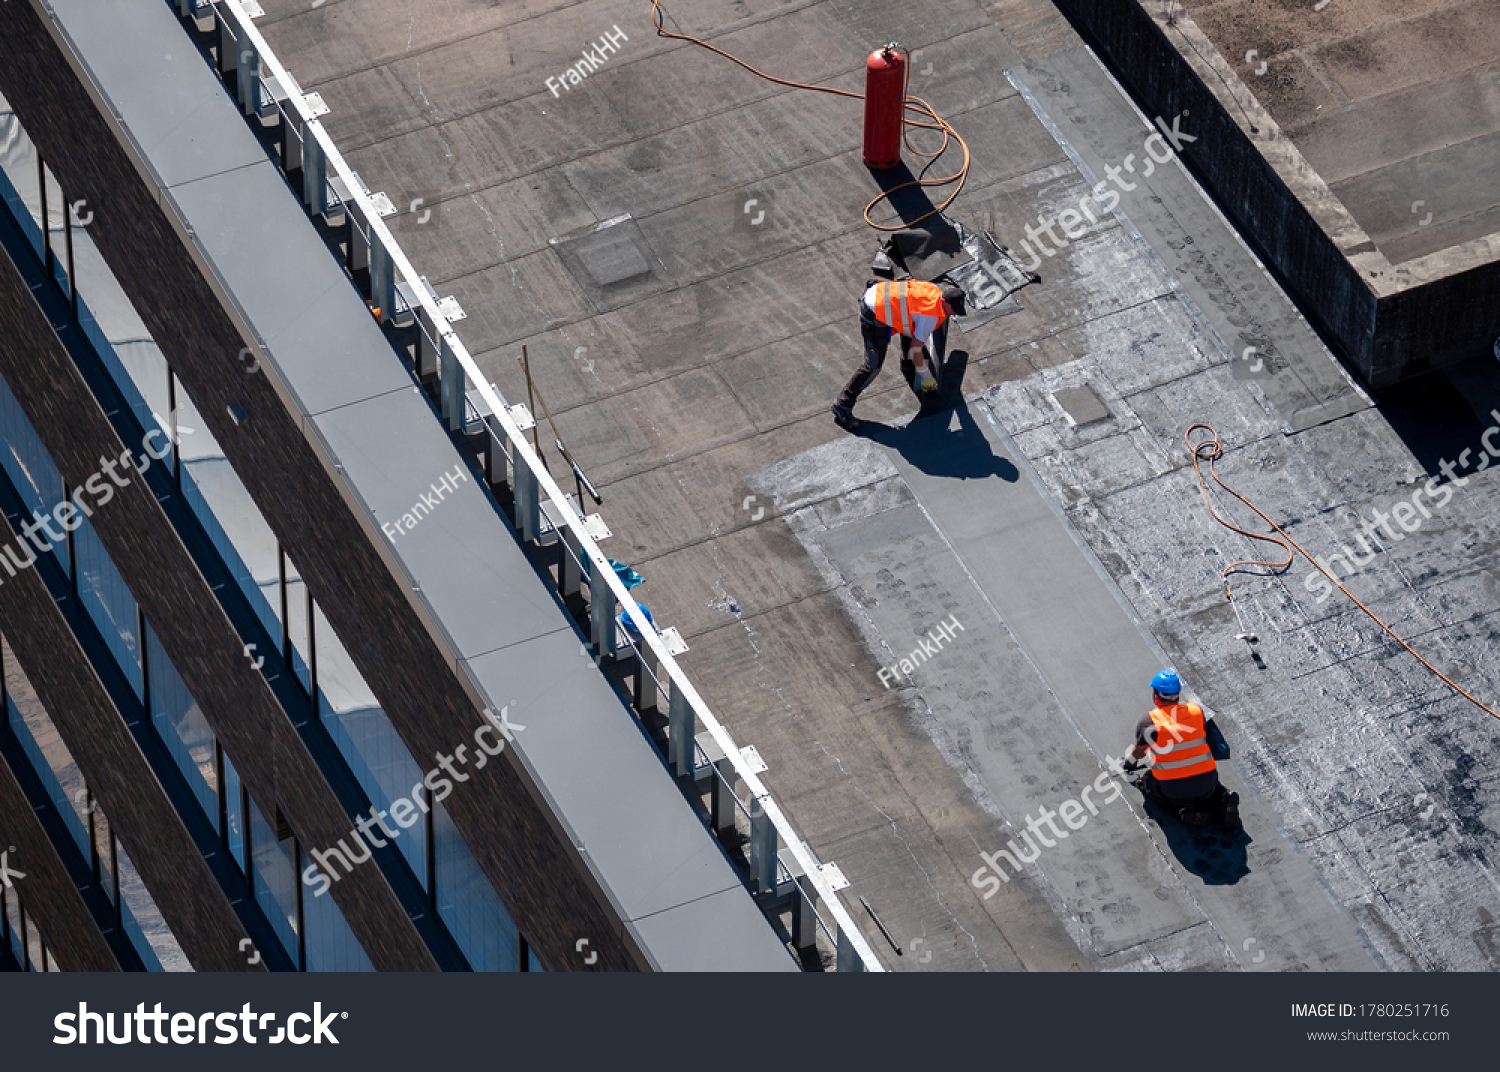 Birds eye view of a roof construction site. Professional bitumen waterproofing on a flat building. #1780251716